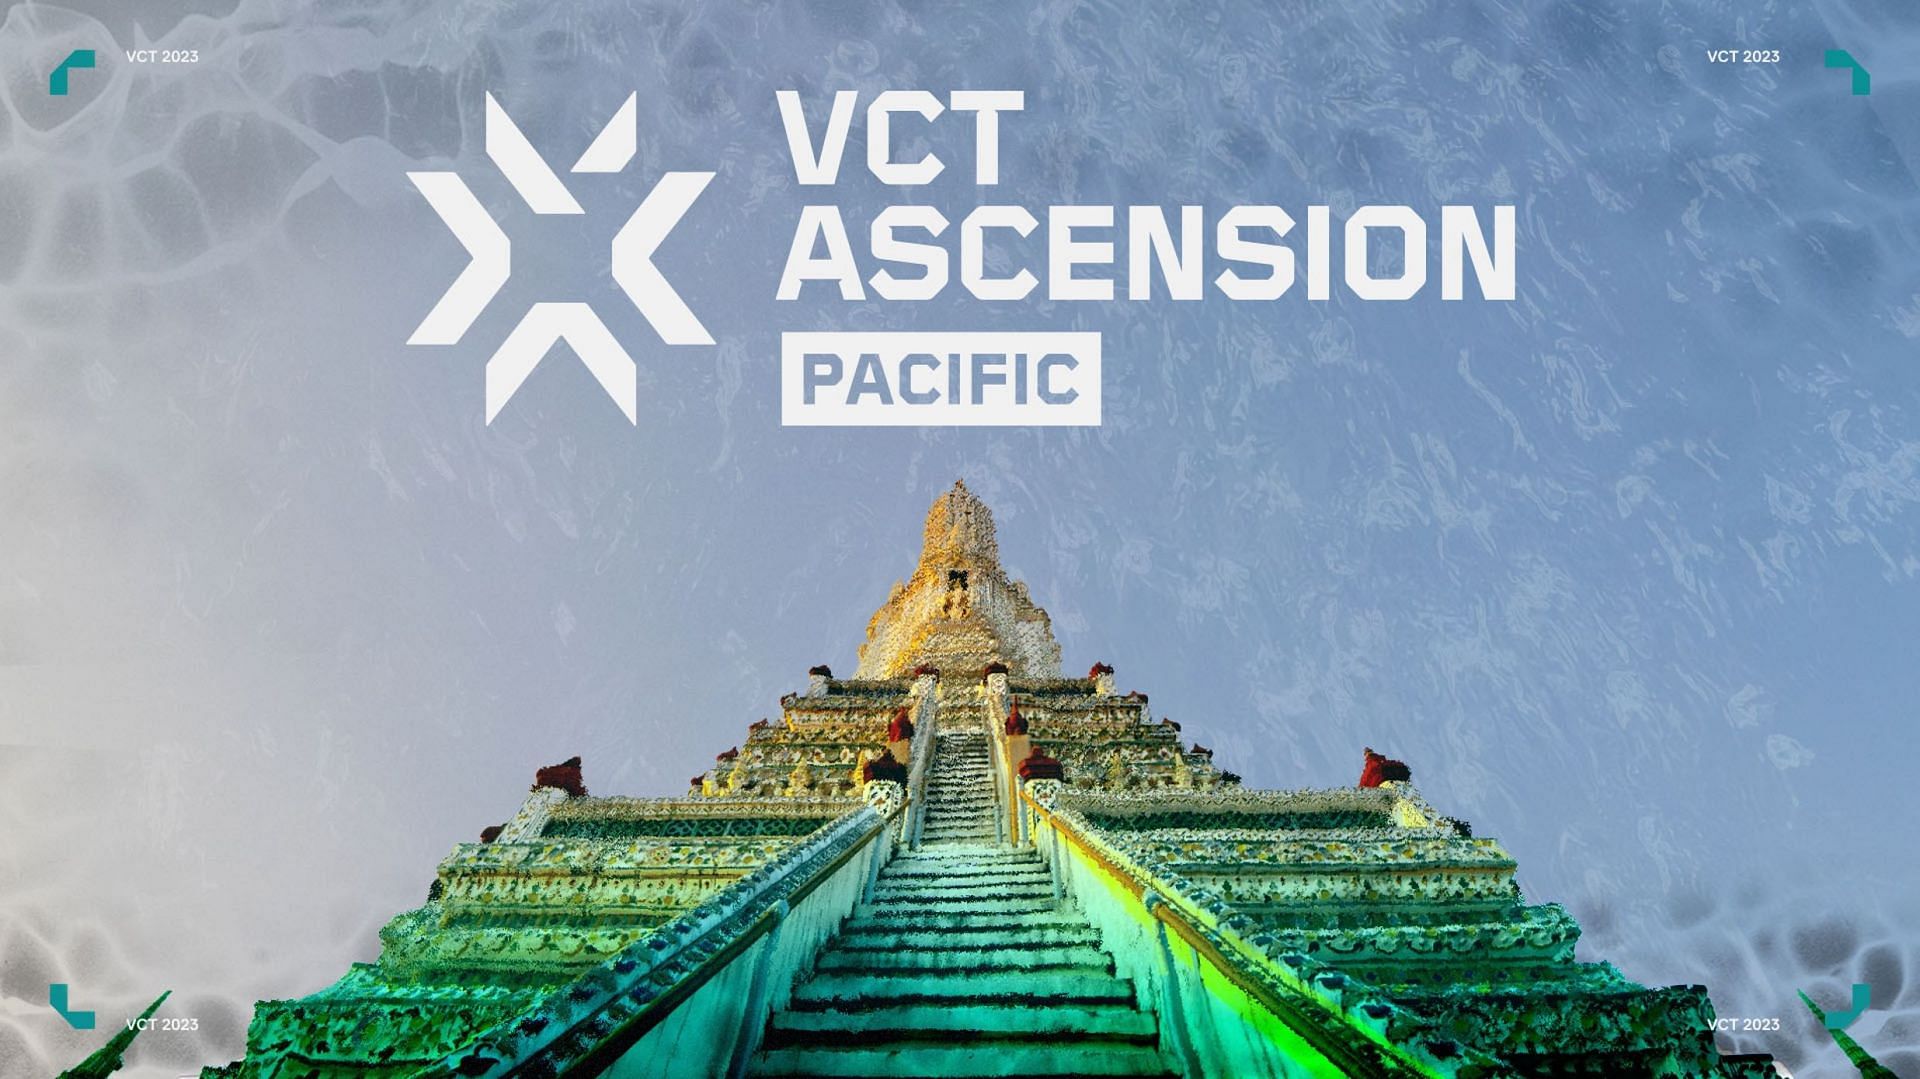 VCT Ascension Pacific 2023 Teams, schedule, where to watch, and more